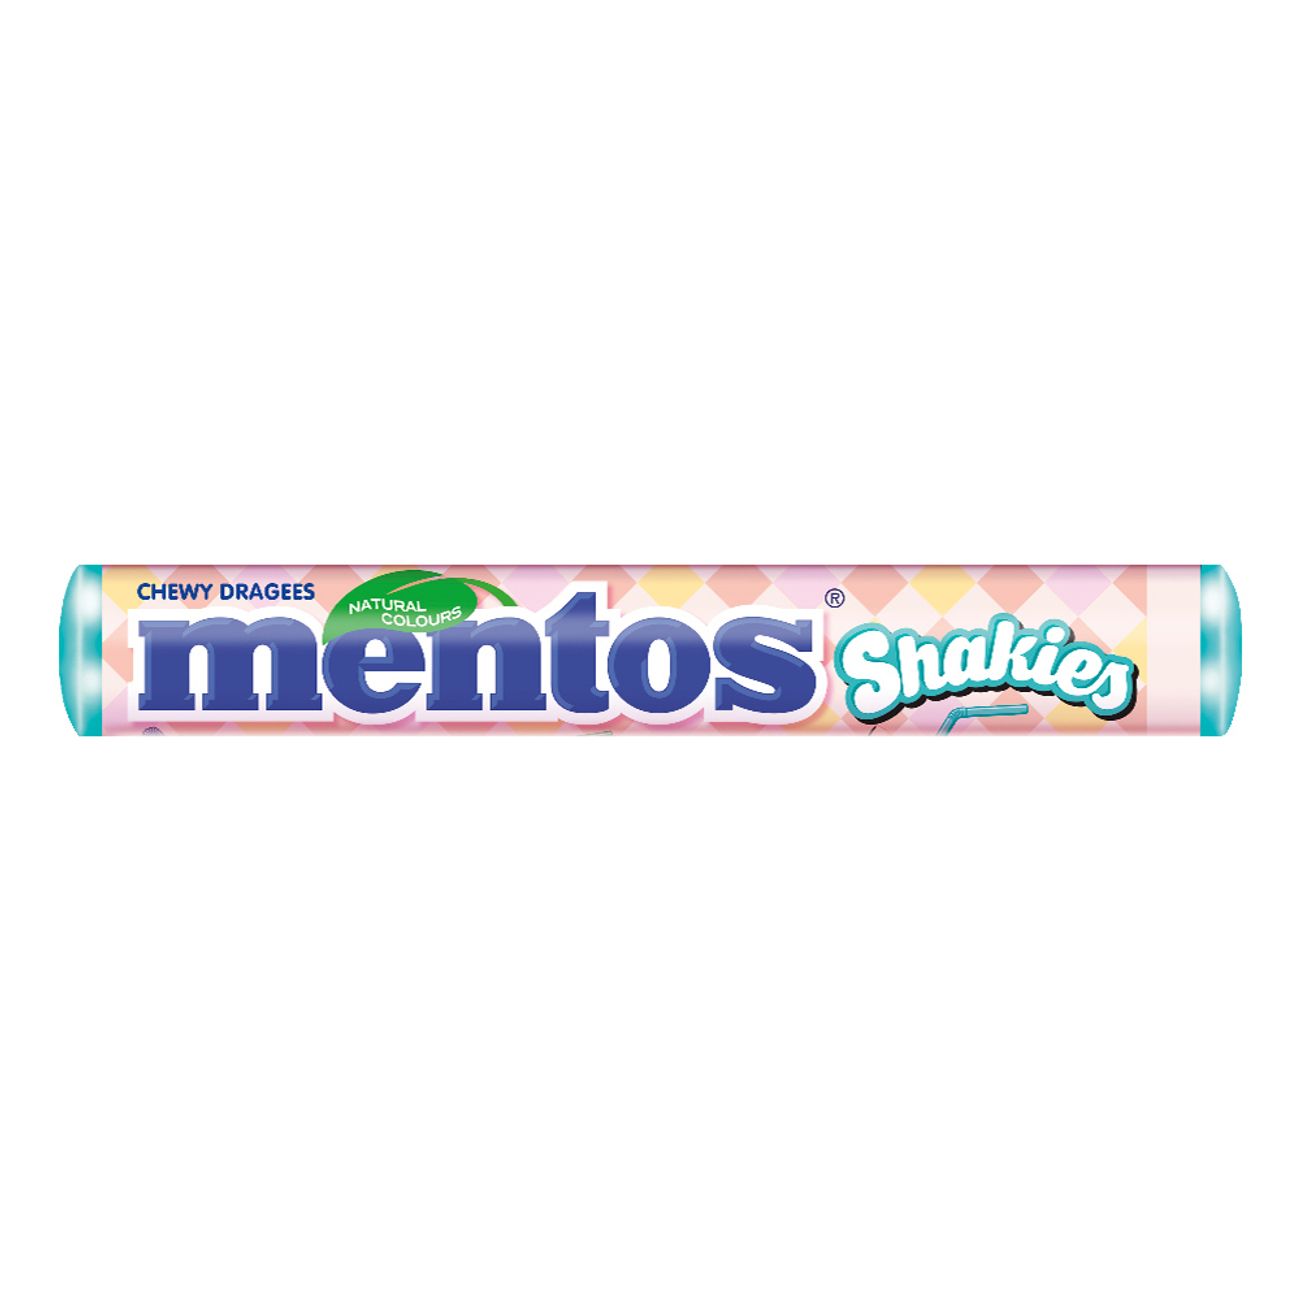 mentos-rulle-shakies-1